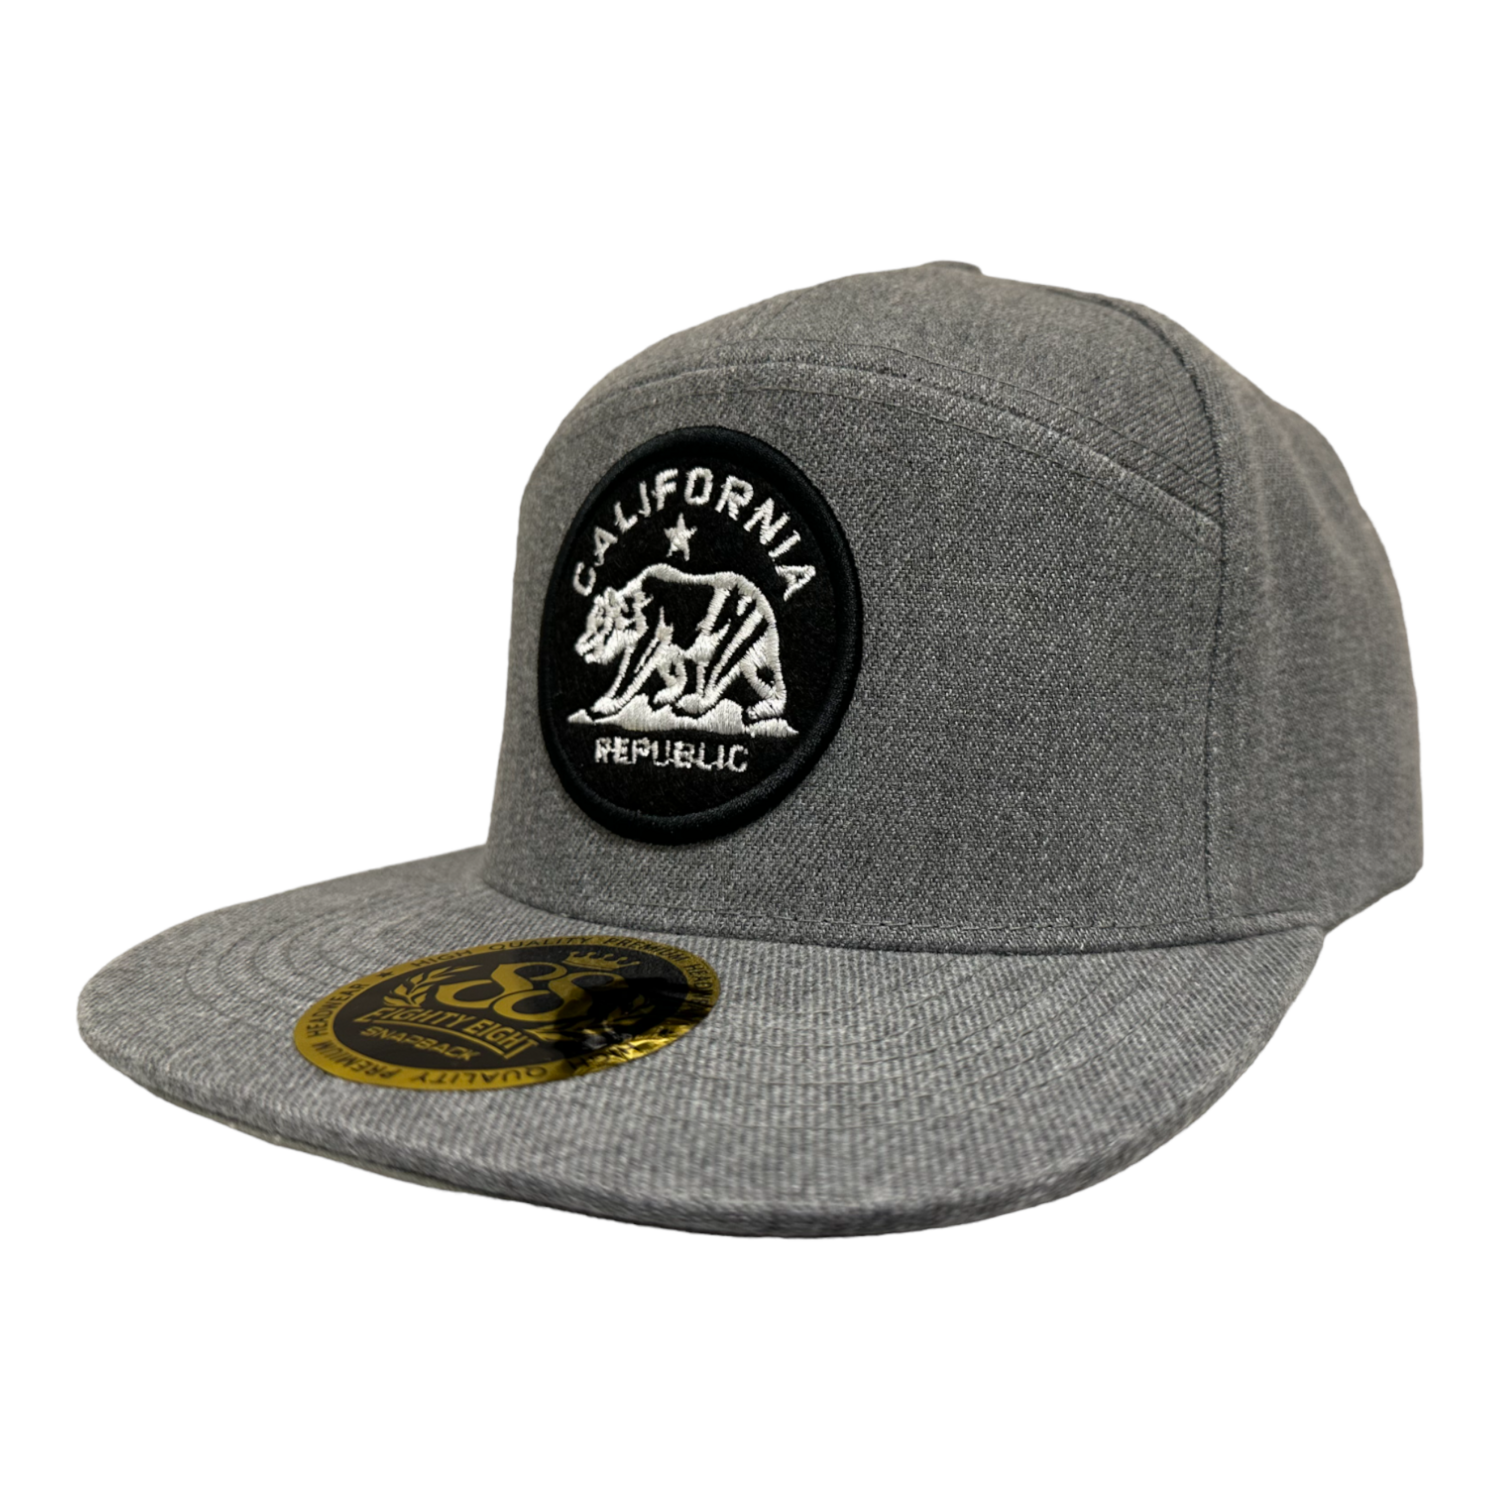 California Republic Round Patch White on Black Snapback 6 Panel Adjustable Snap Fit Hat